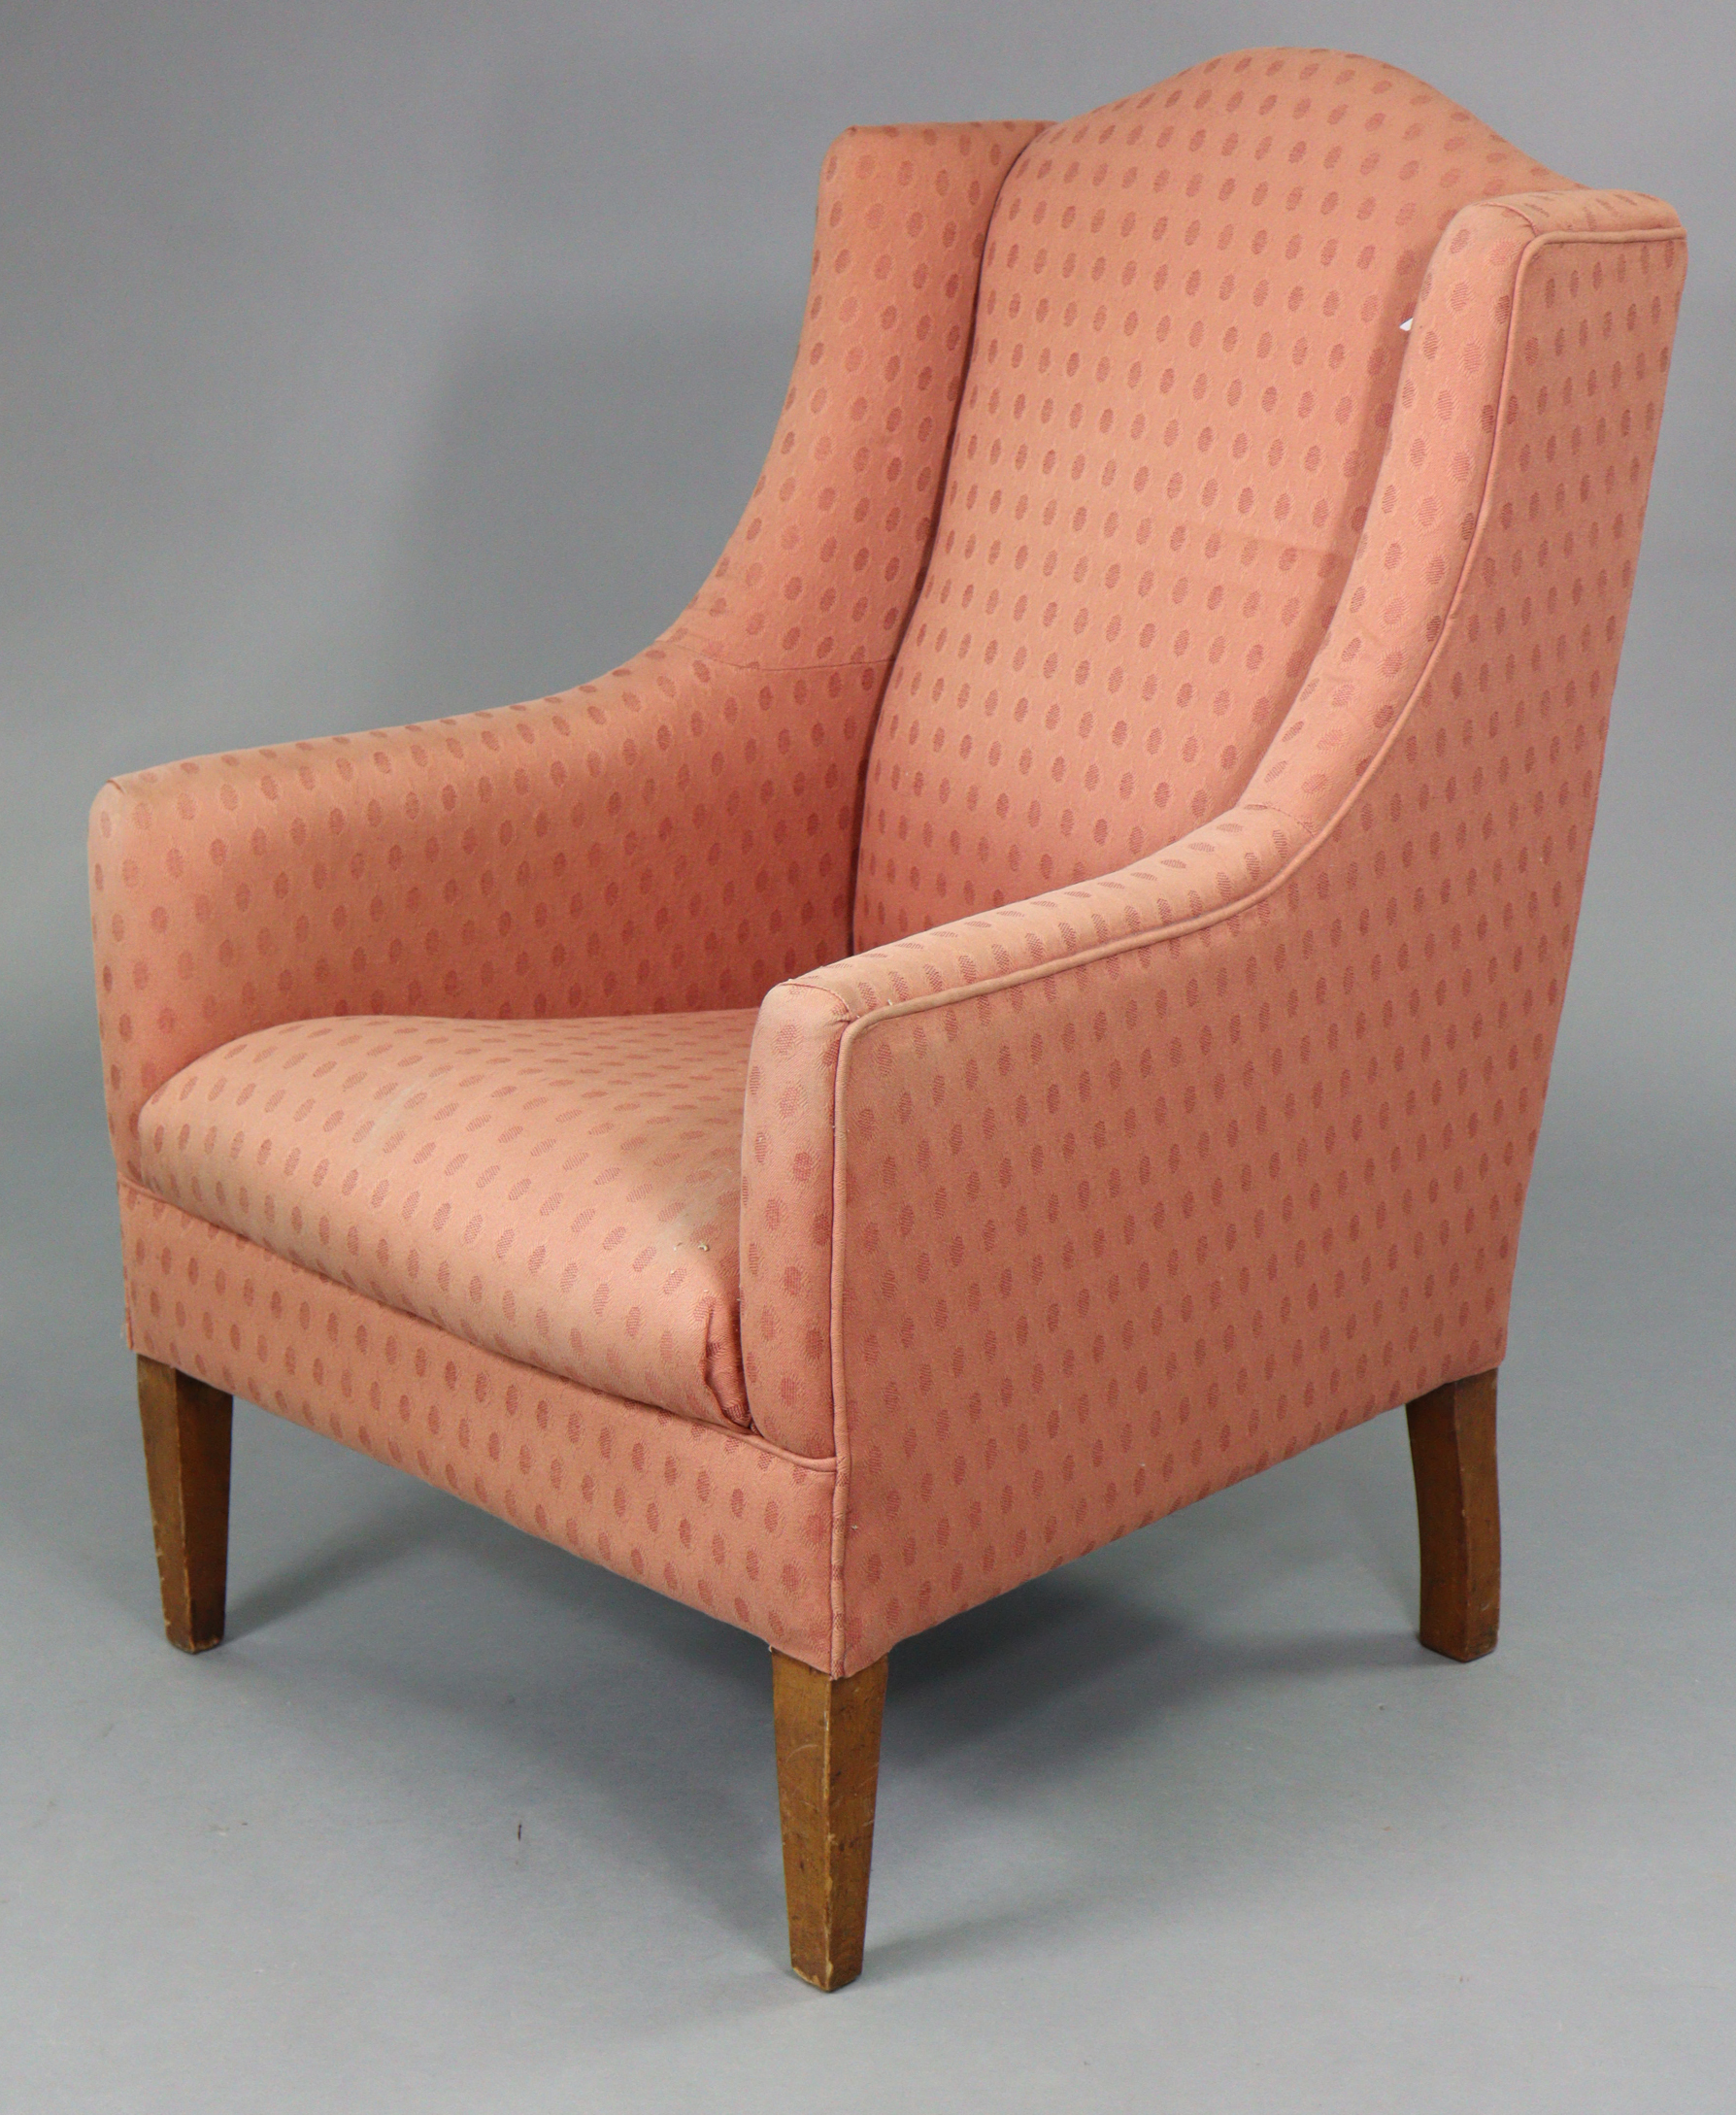 An Edwardian armchair with rounded back & sprung seat upholstered pink geometric material, & on